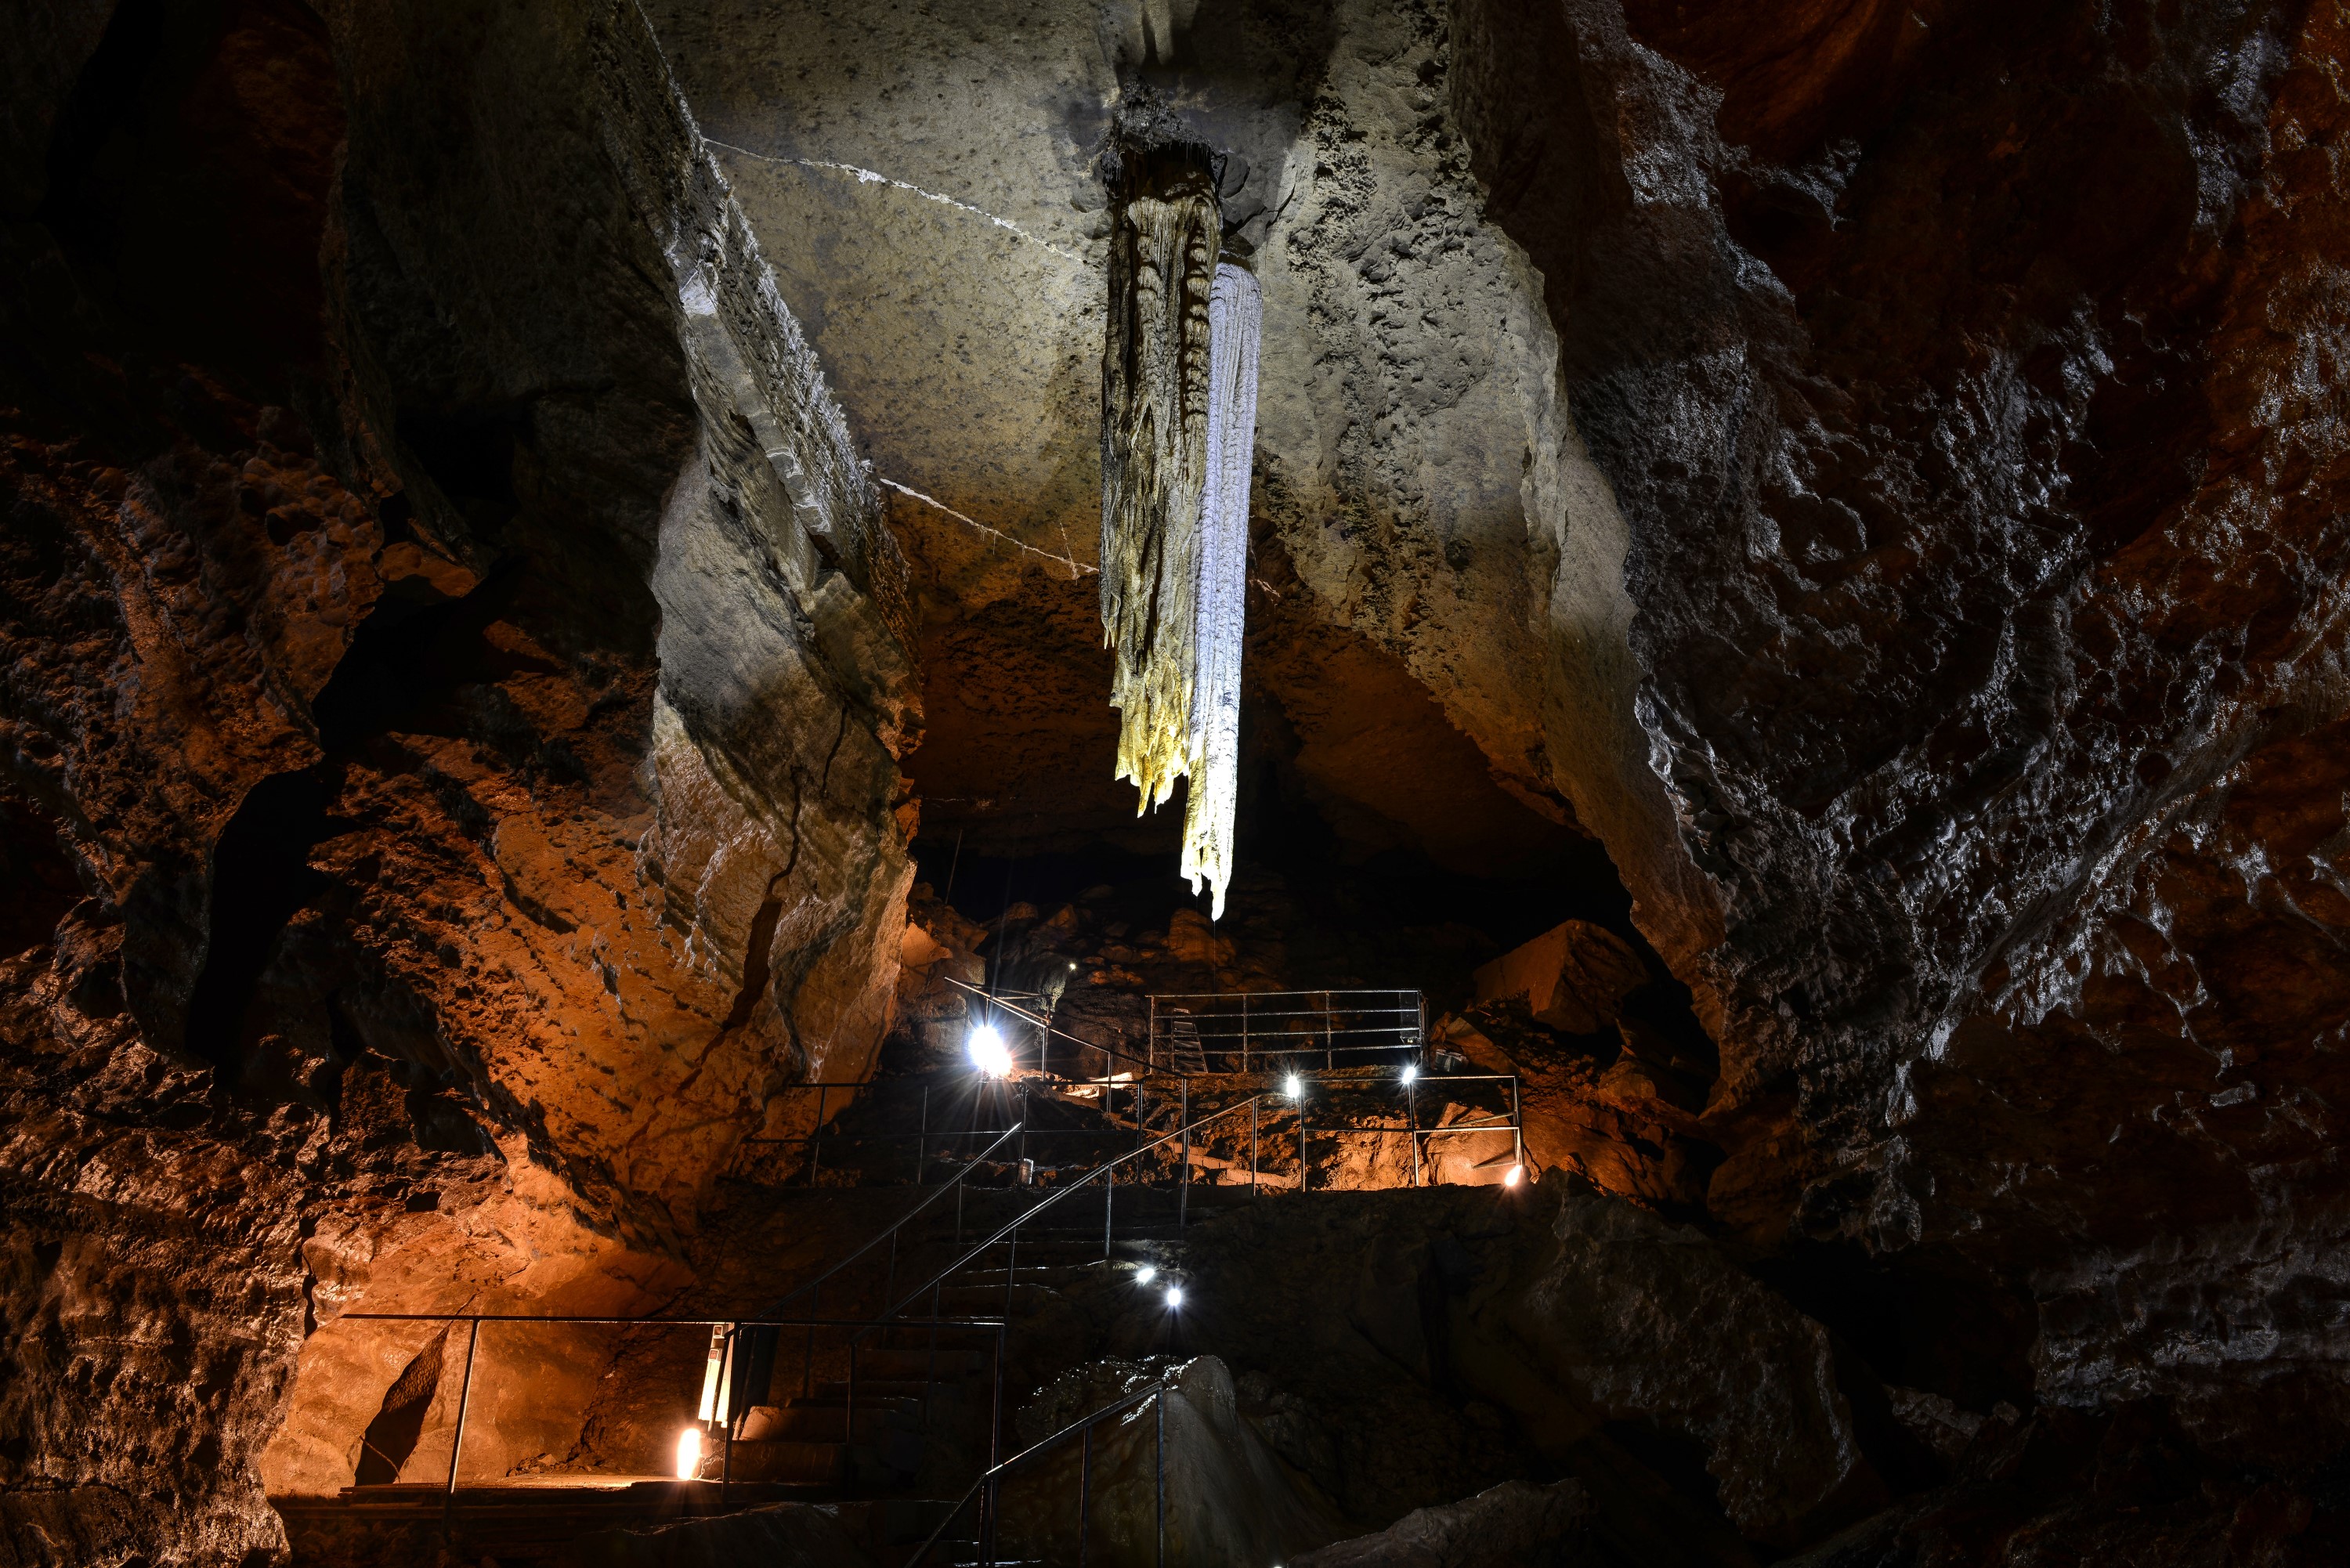 The Great Stalactite